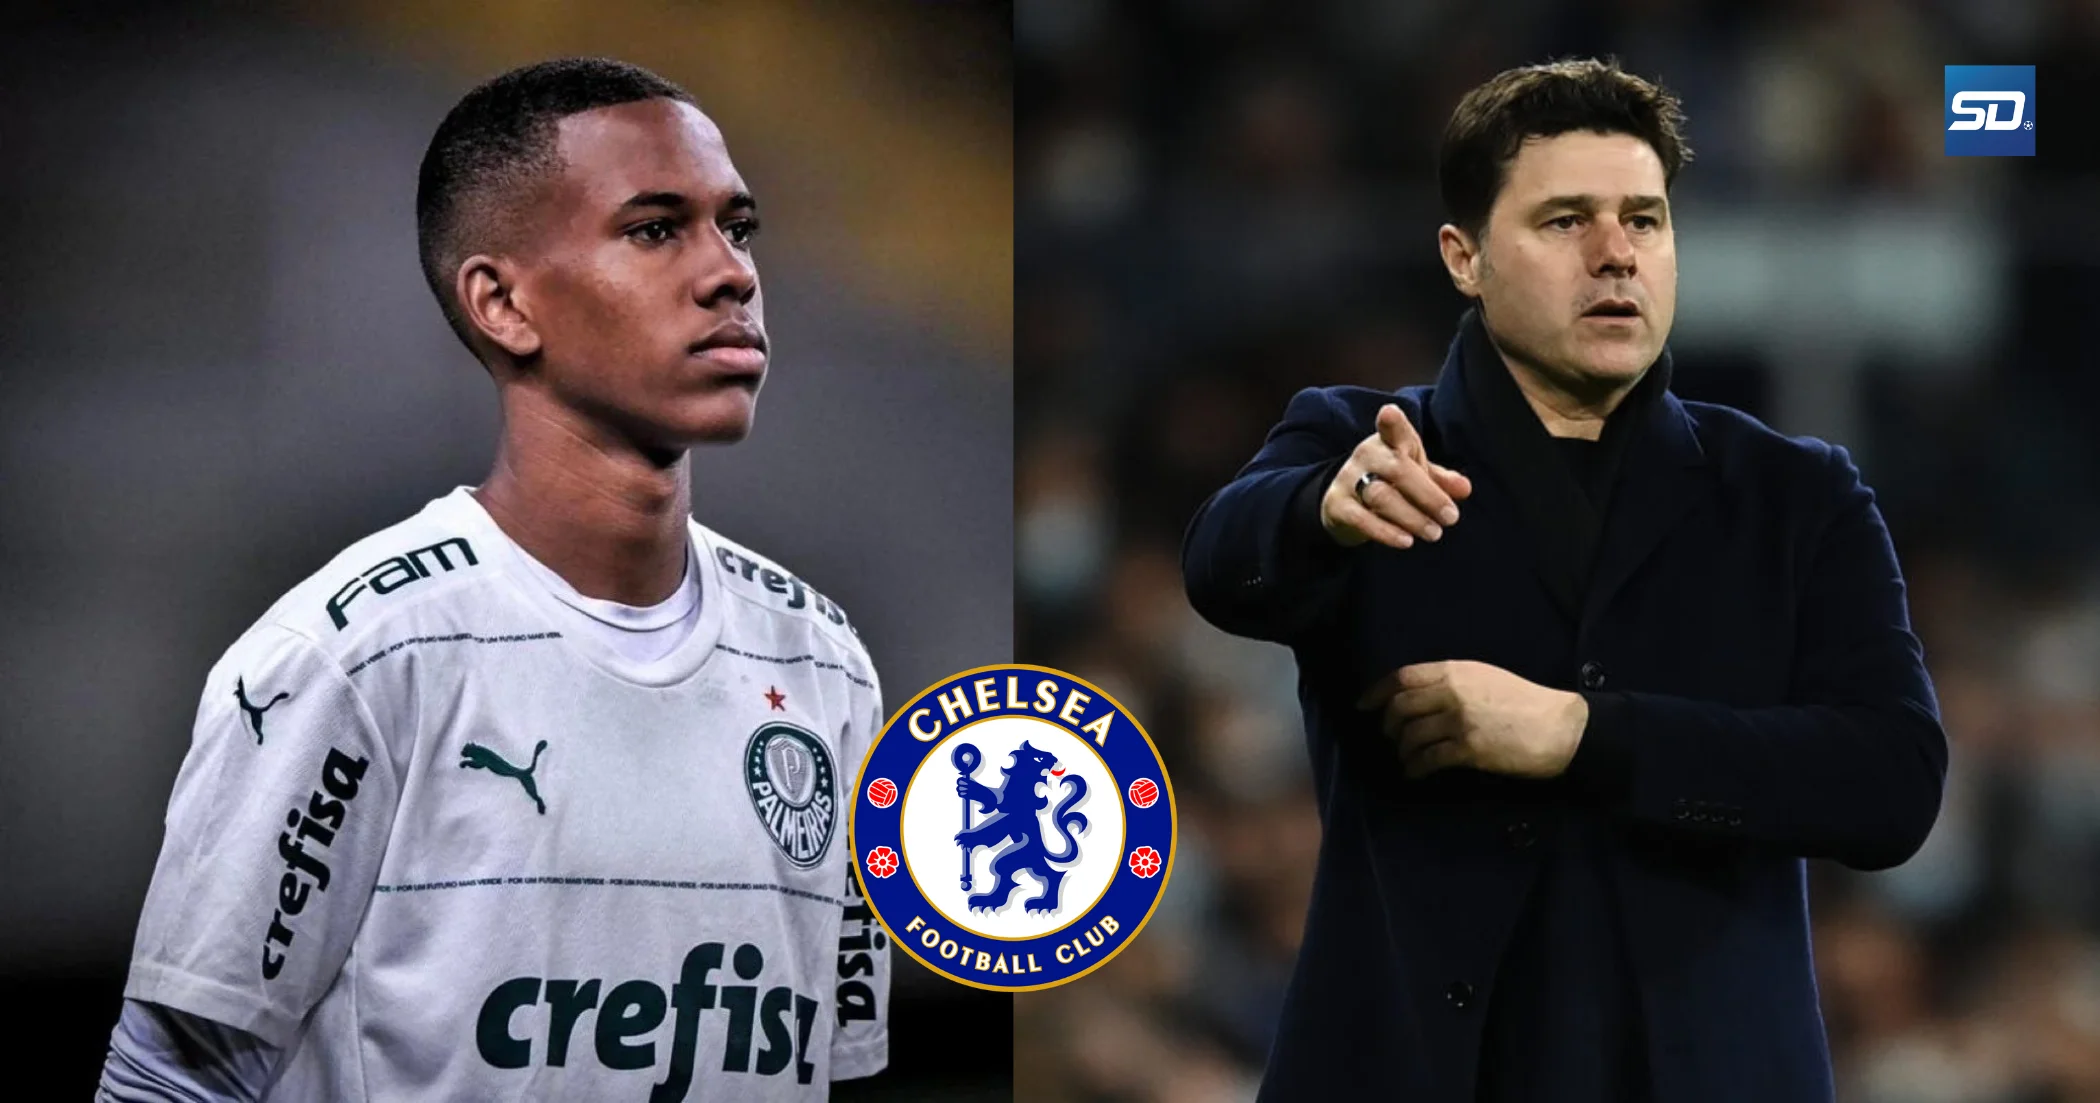 Chelsea Transfer News: The Blues agree personal terms with Palmeiras winger Estevao Willian